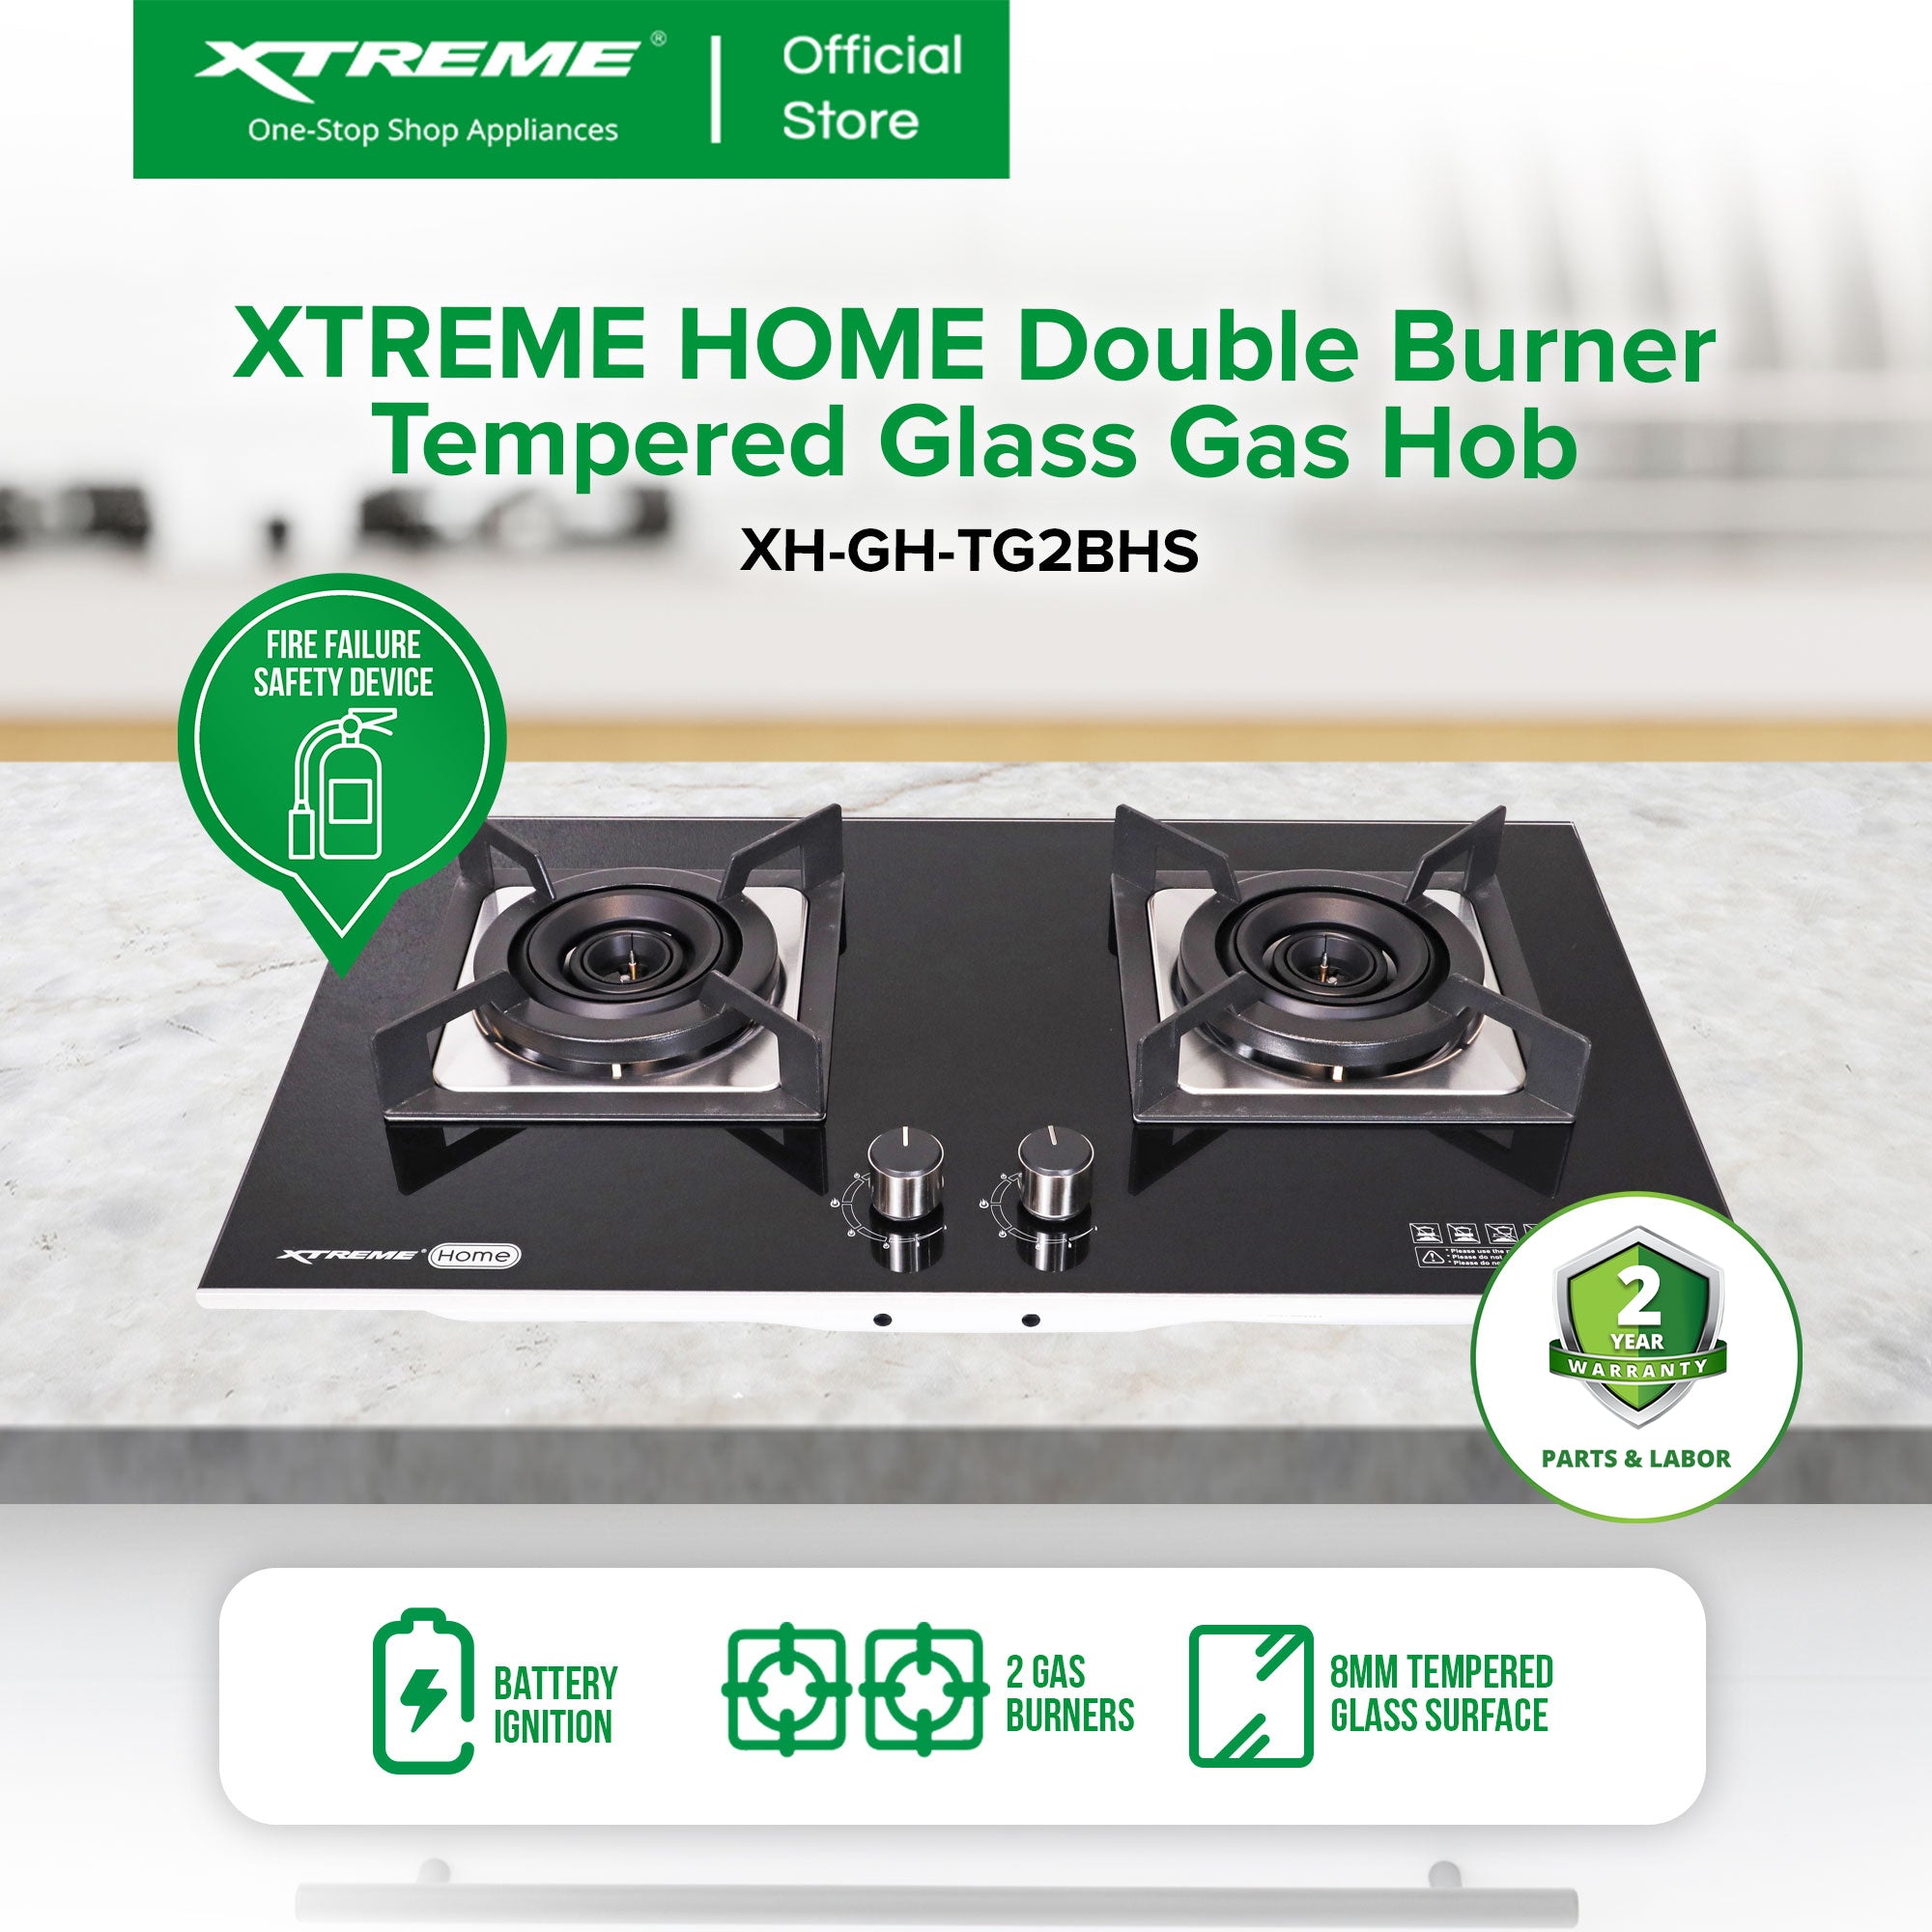 XTREME HOME Double Burner Tempered Glass Gas Hob | XH-GH-TG2BHS